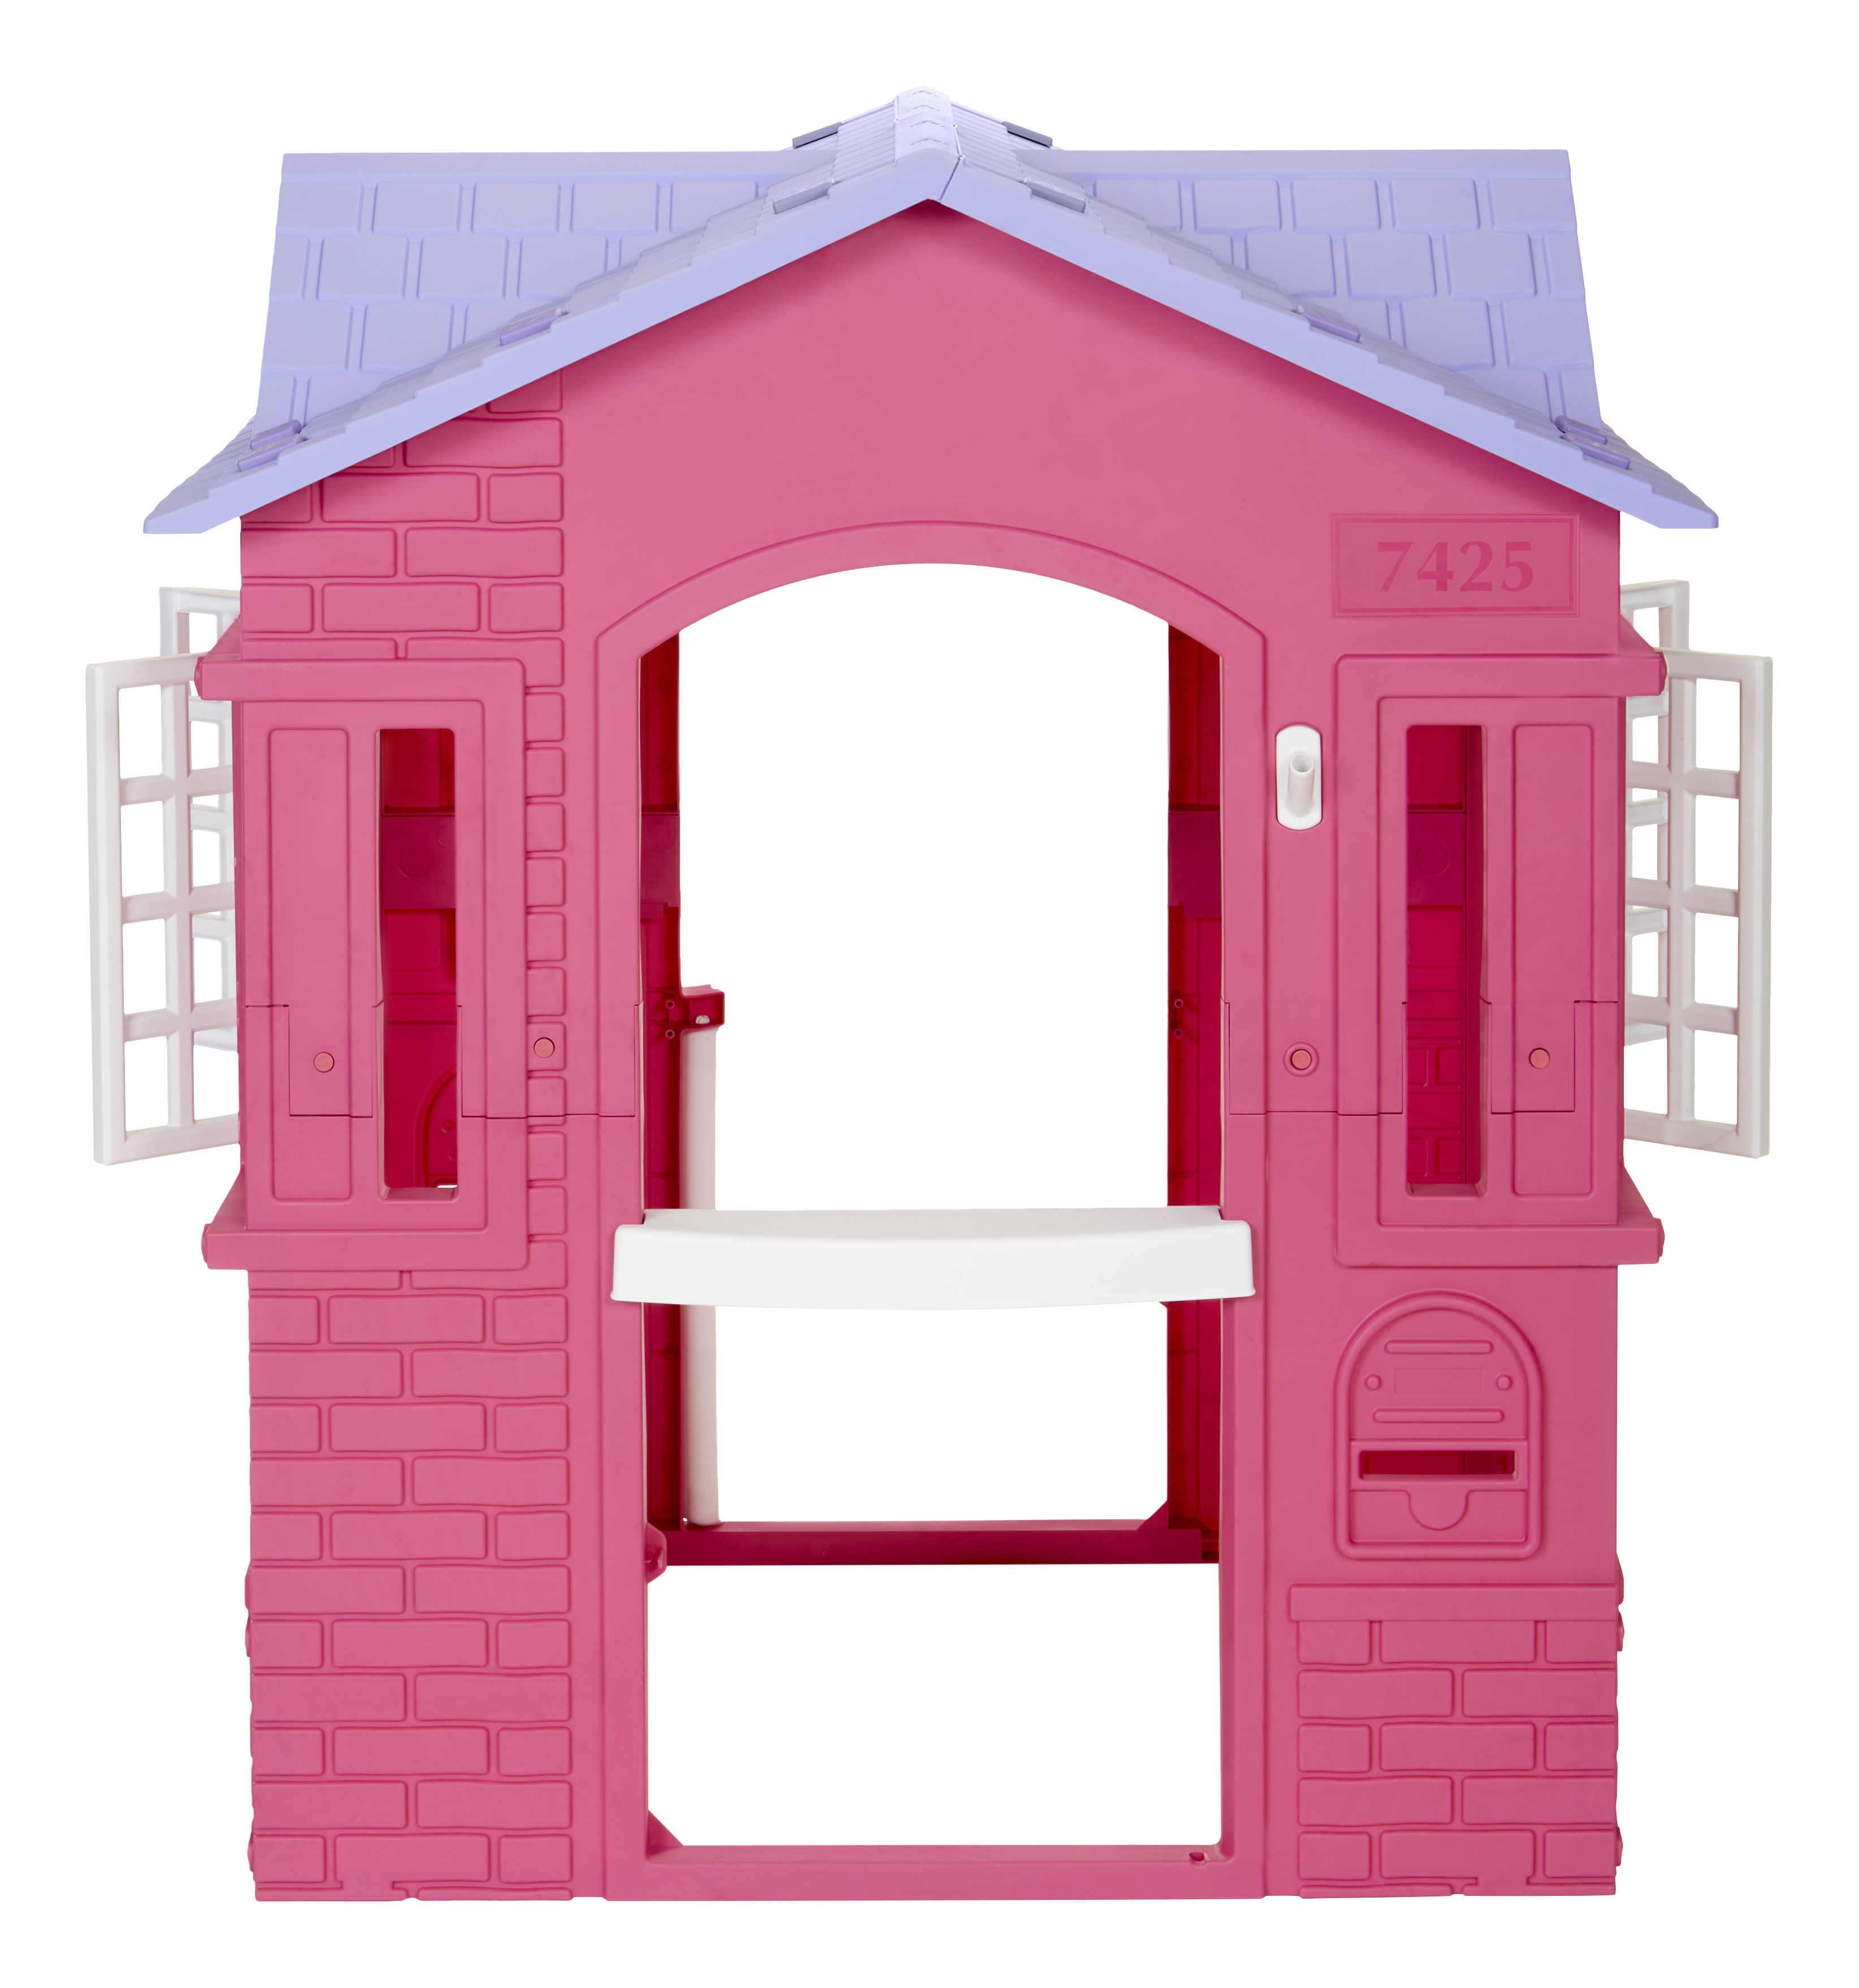 Little Tikes Cape Cottage House, Pink - Pretend Playhouse for Girls Boys Kids 2-8 Years Old - image 5 of 8